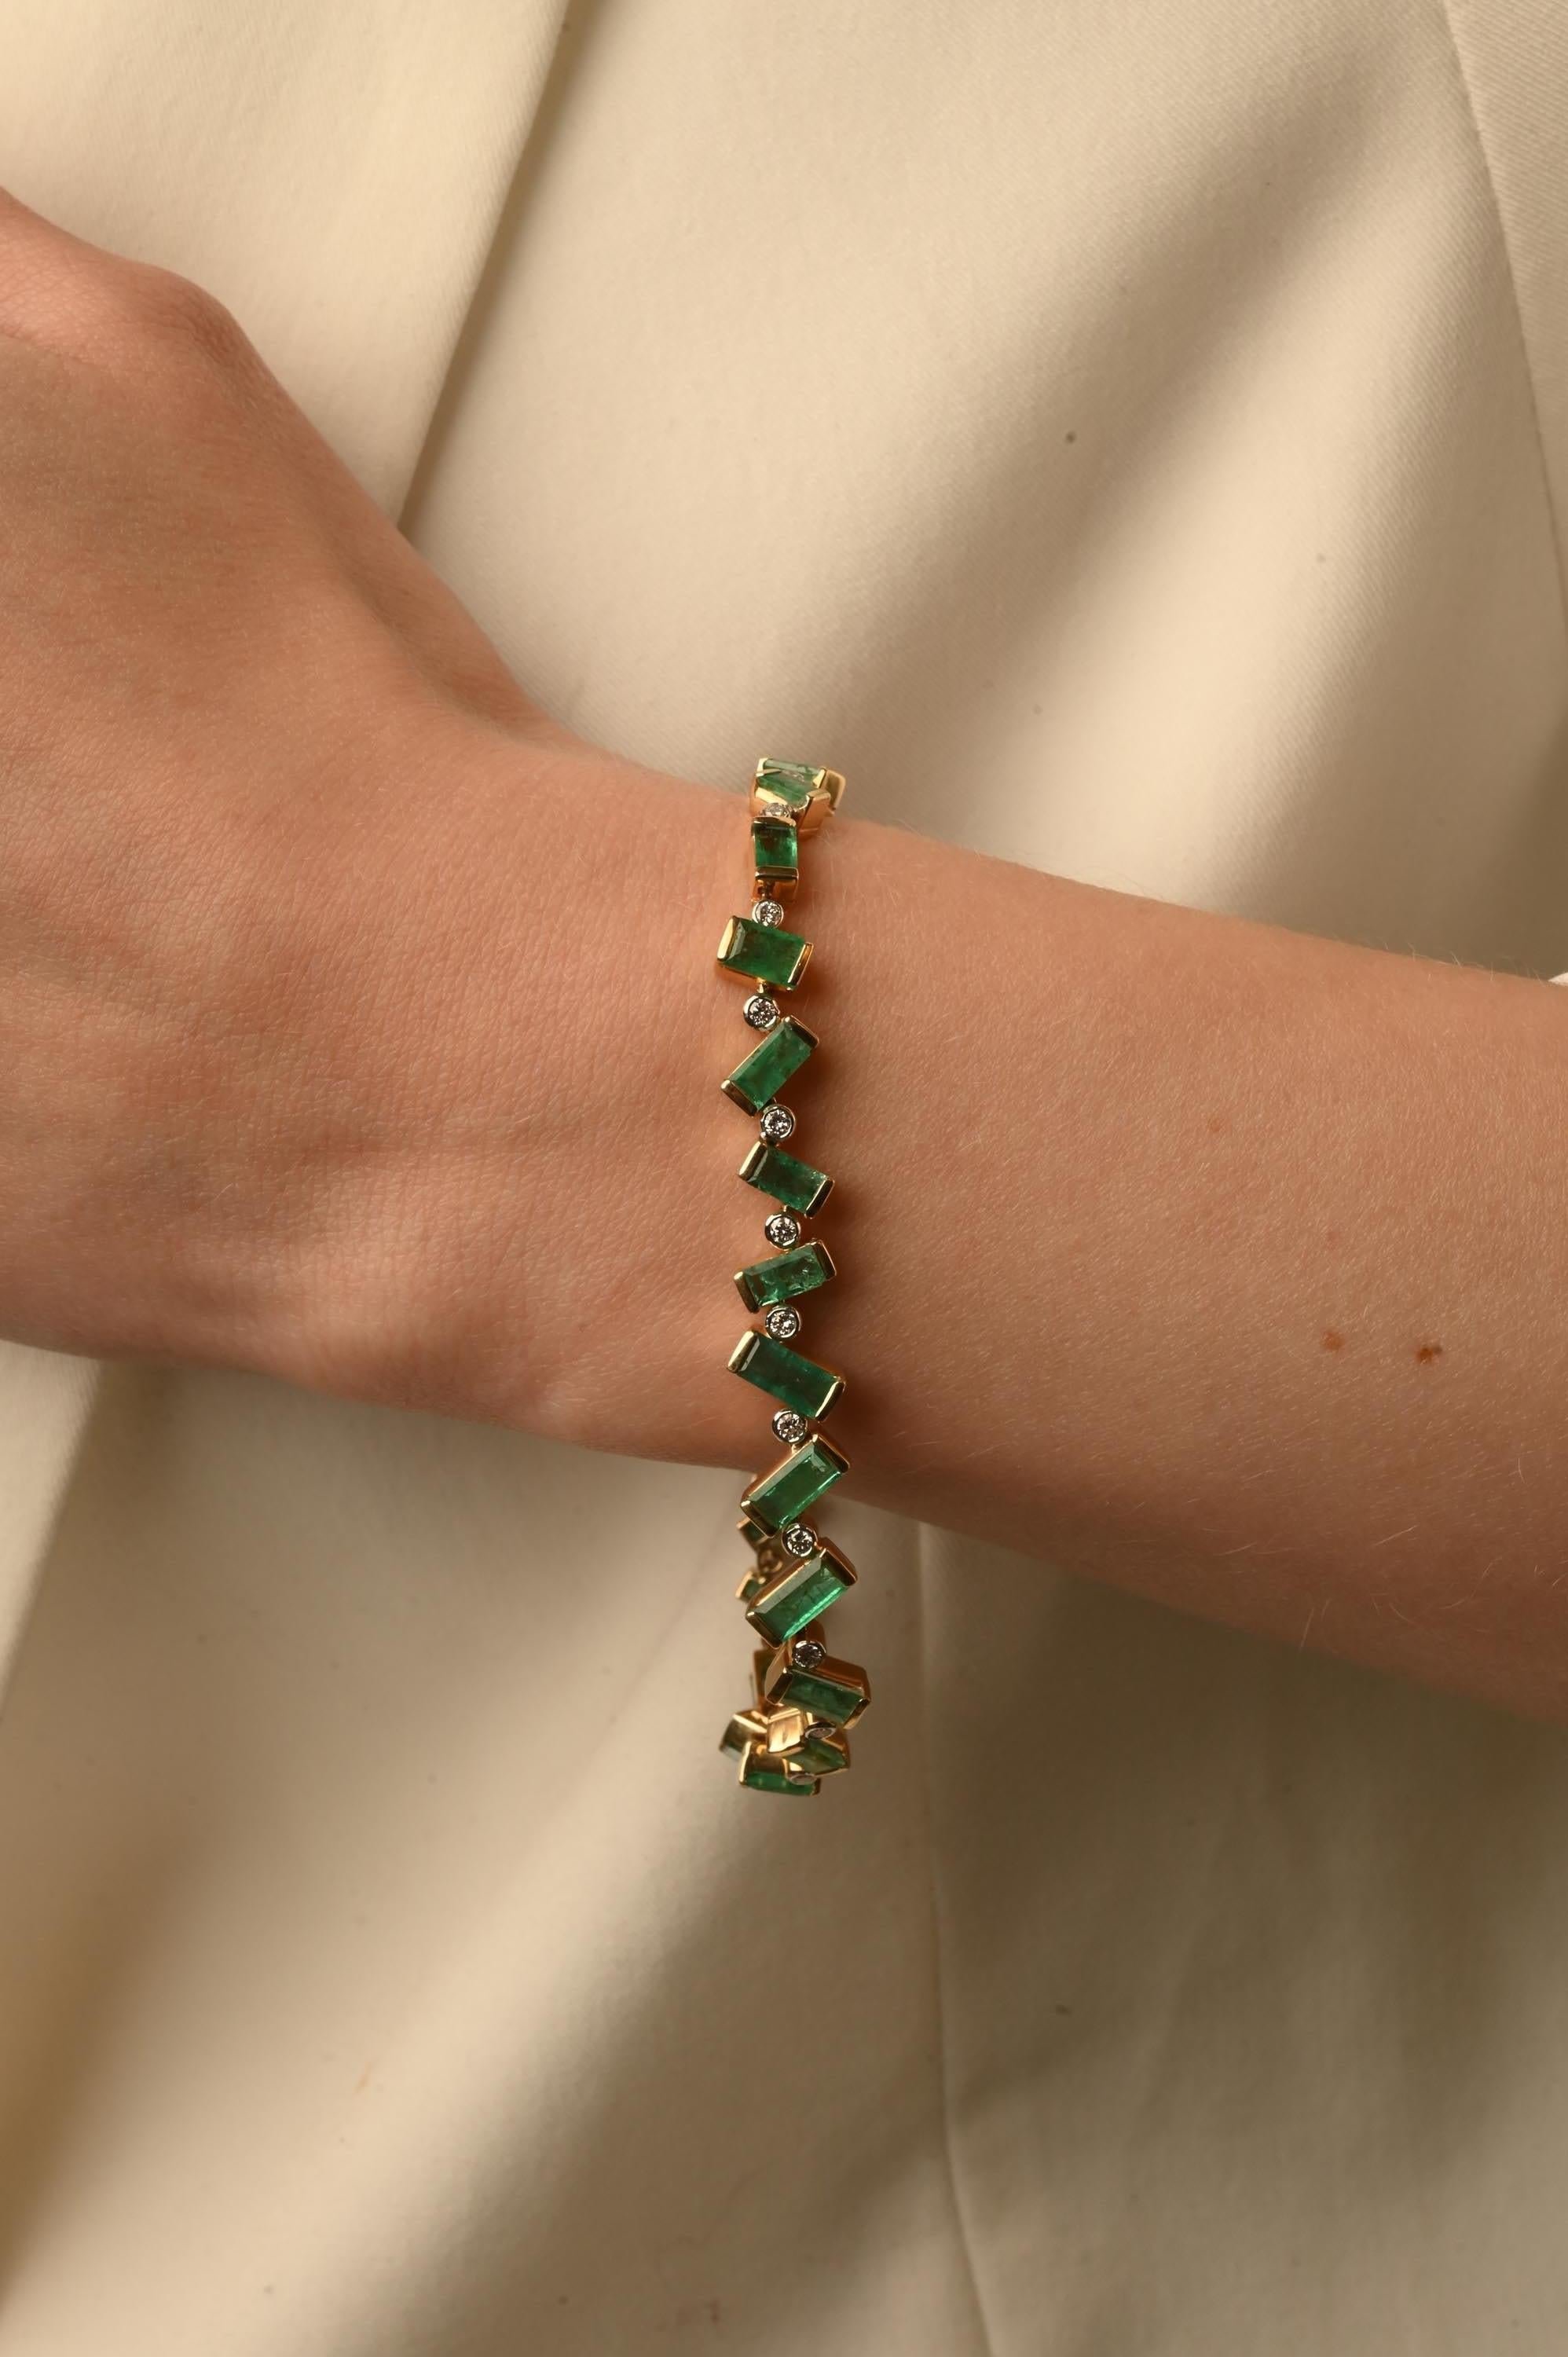 Emerald and Diamond bracelet in 14K Gold. It has a perfect octagon cut gemstone to make you stand out on any occasion or an event.
A tennis bracelet is an essential piece of jewelry when it comes to your wedding day. The sleek and elegant style